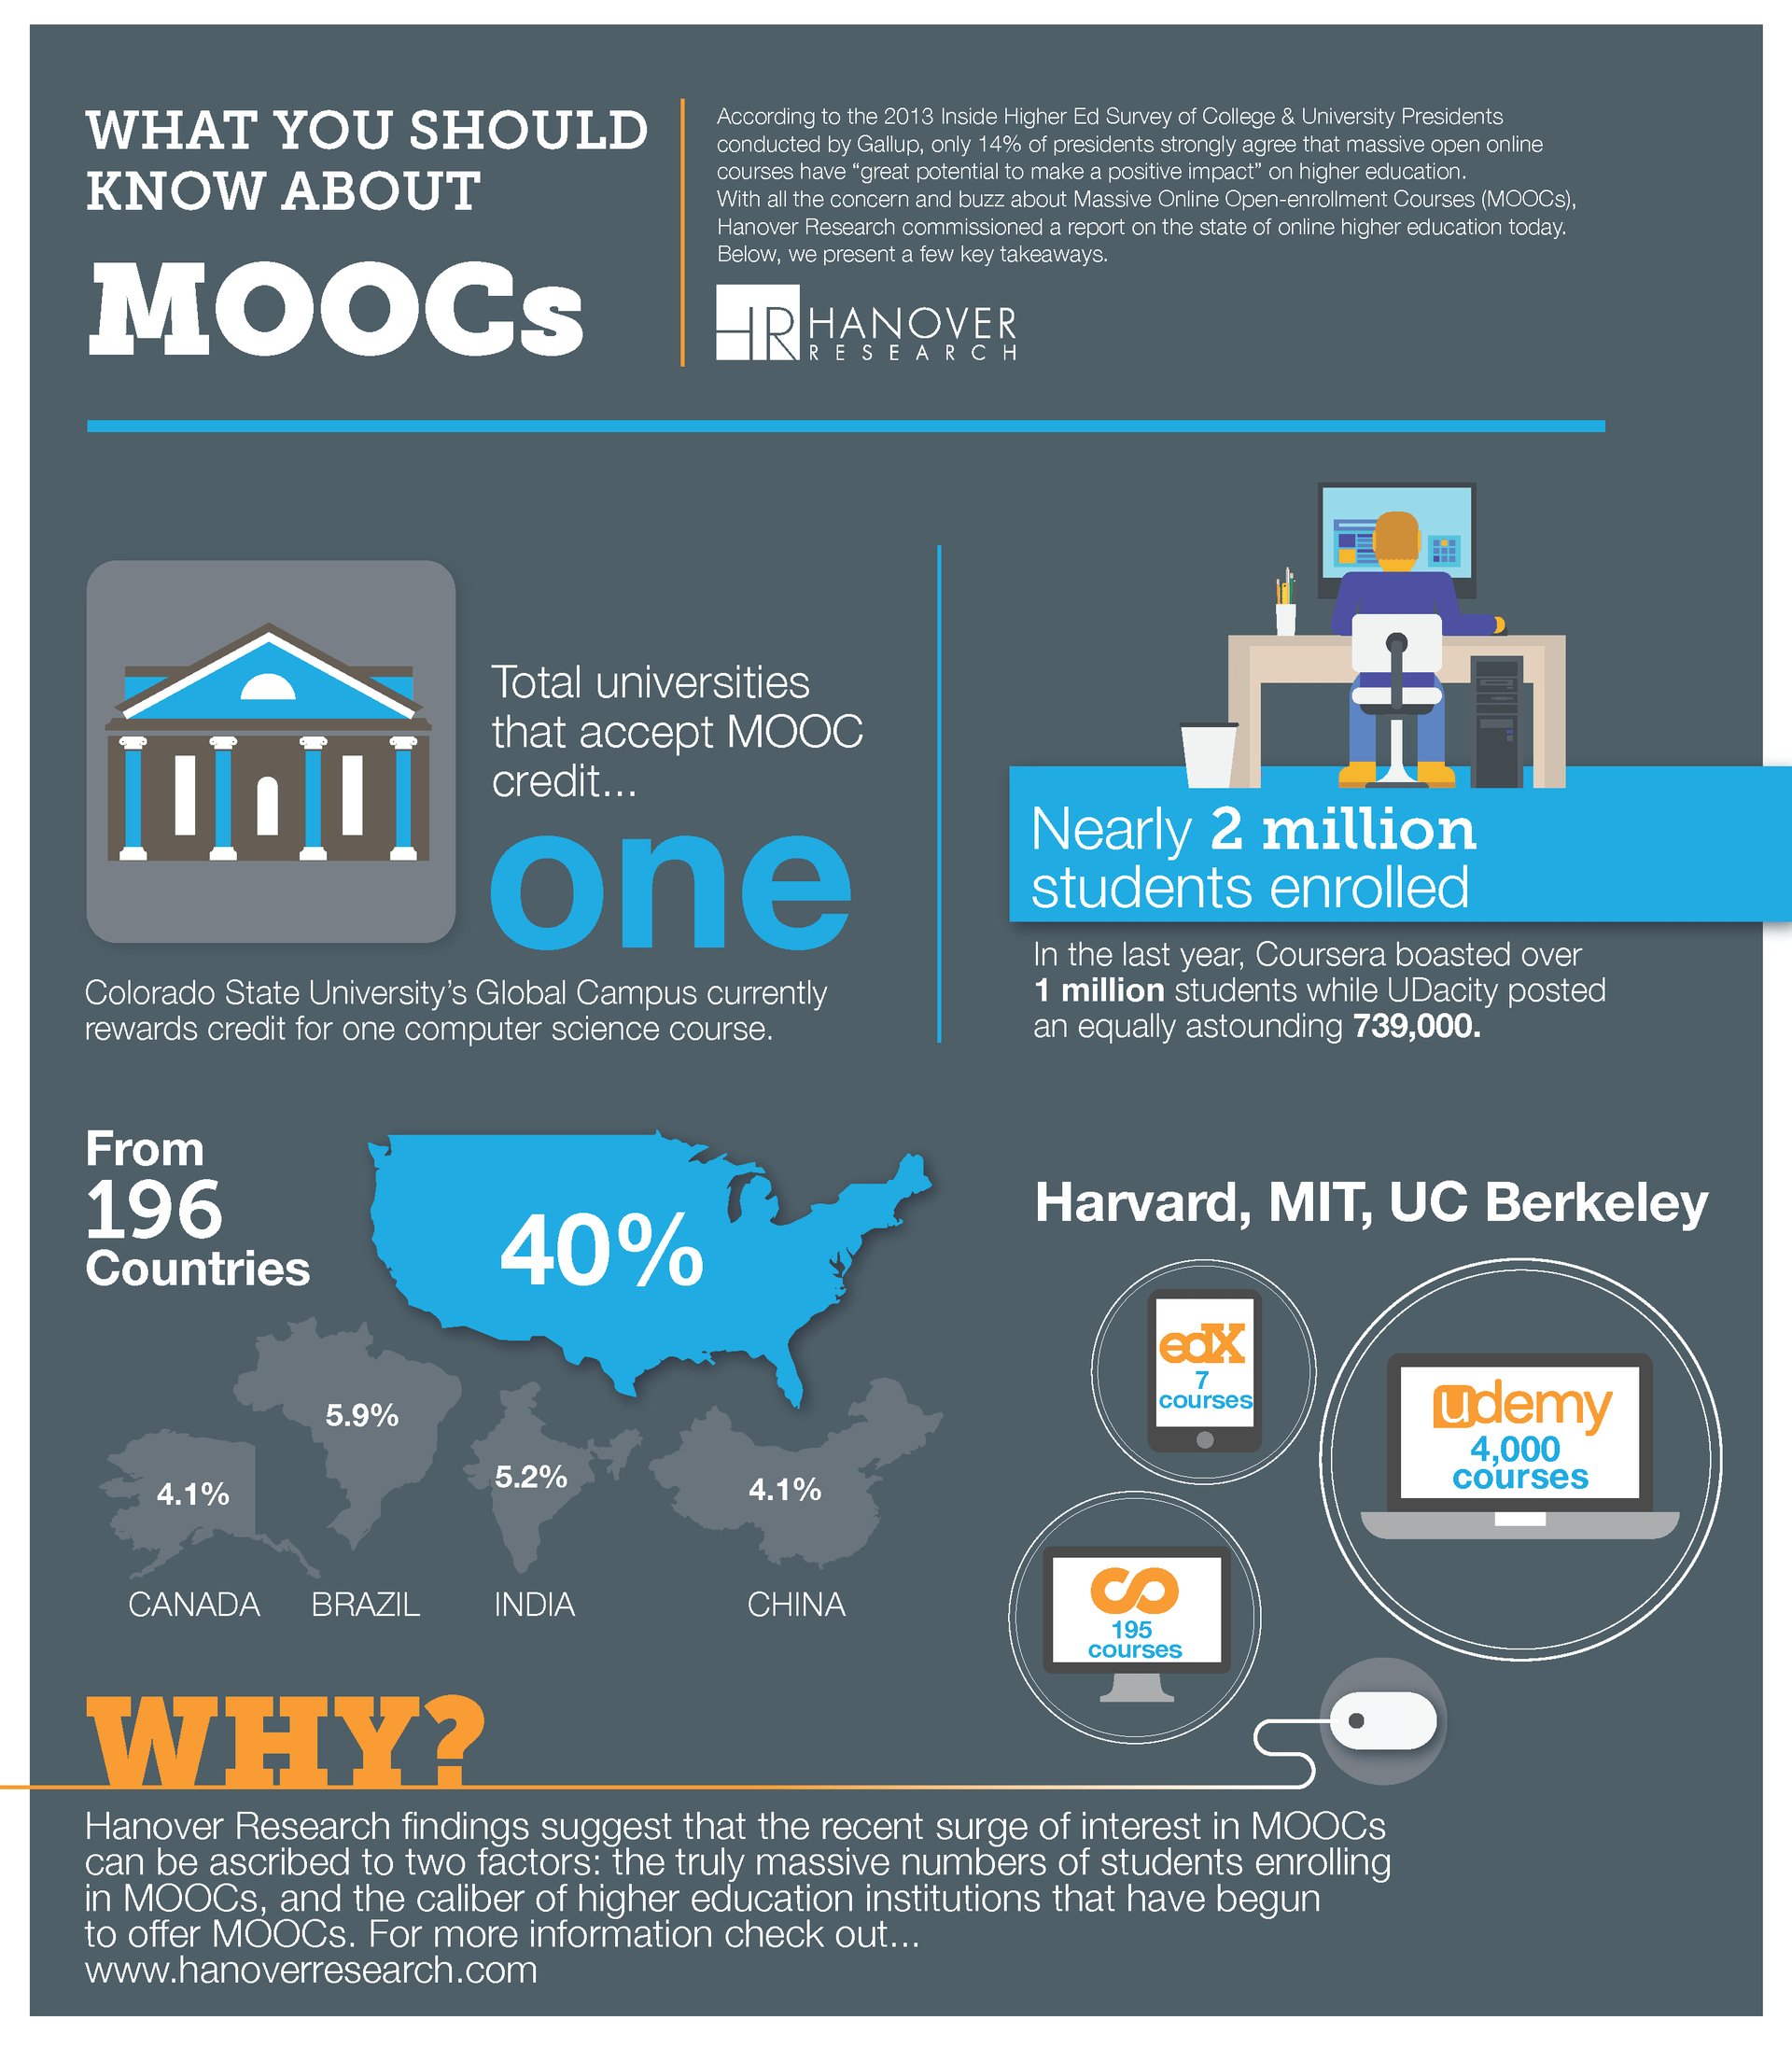 What You Should Know About MOOCs Infographic